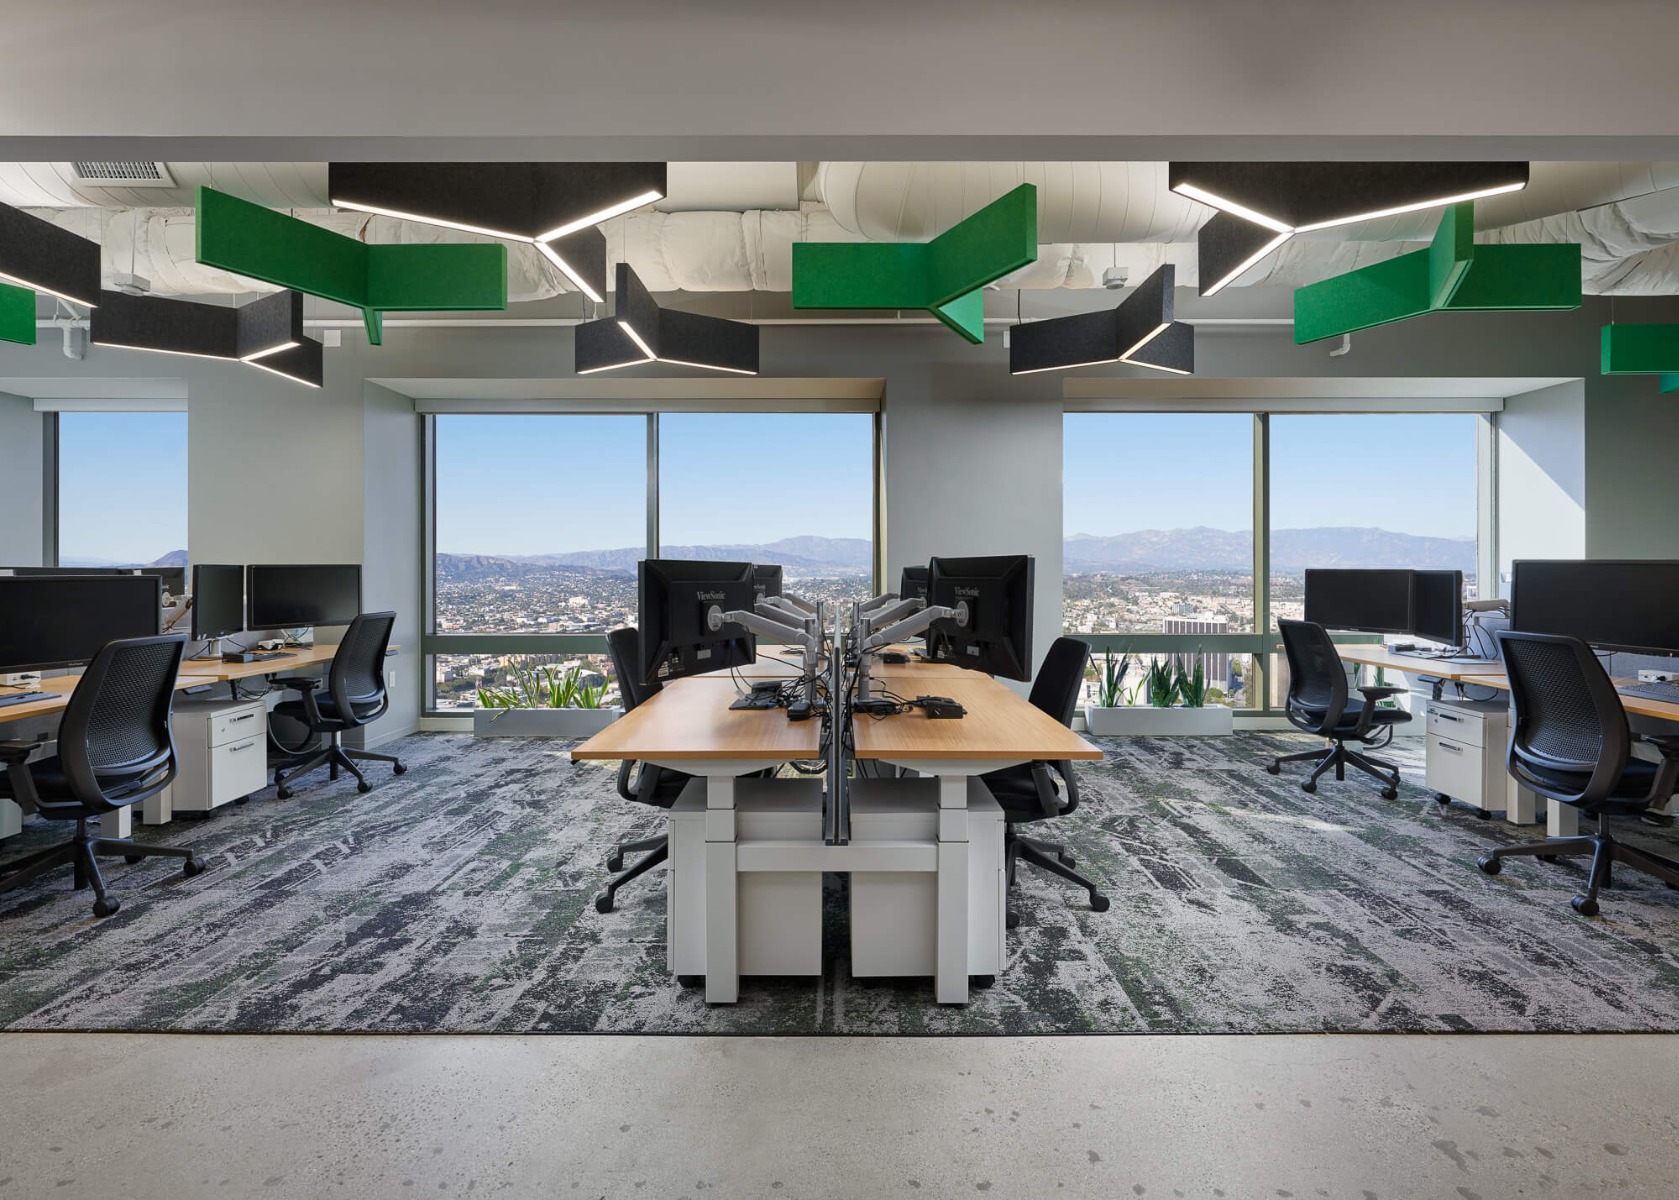 Y-shaped acoustic lighting covered in recycled polyester green and black felt hang over workspaces in an open floor plan office, reducing noise and echo for workers 